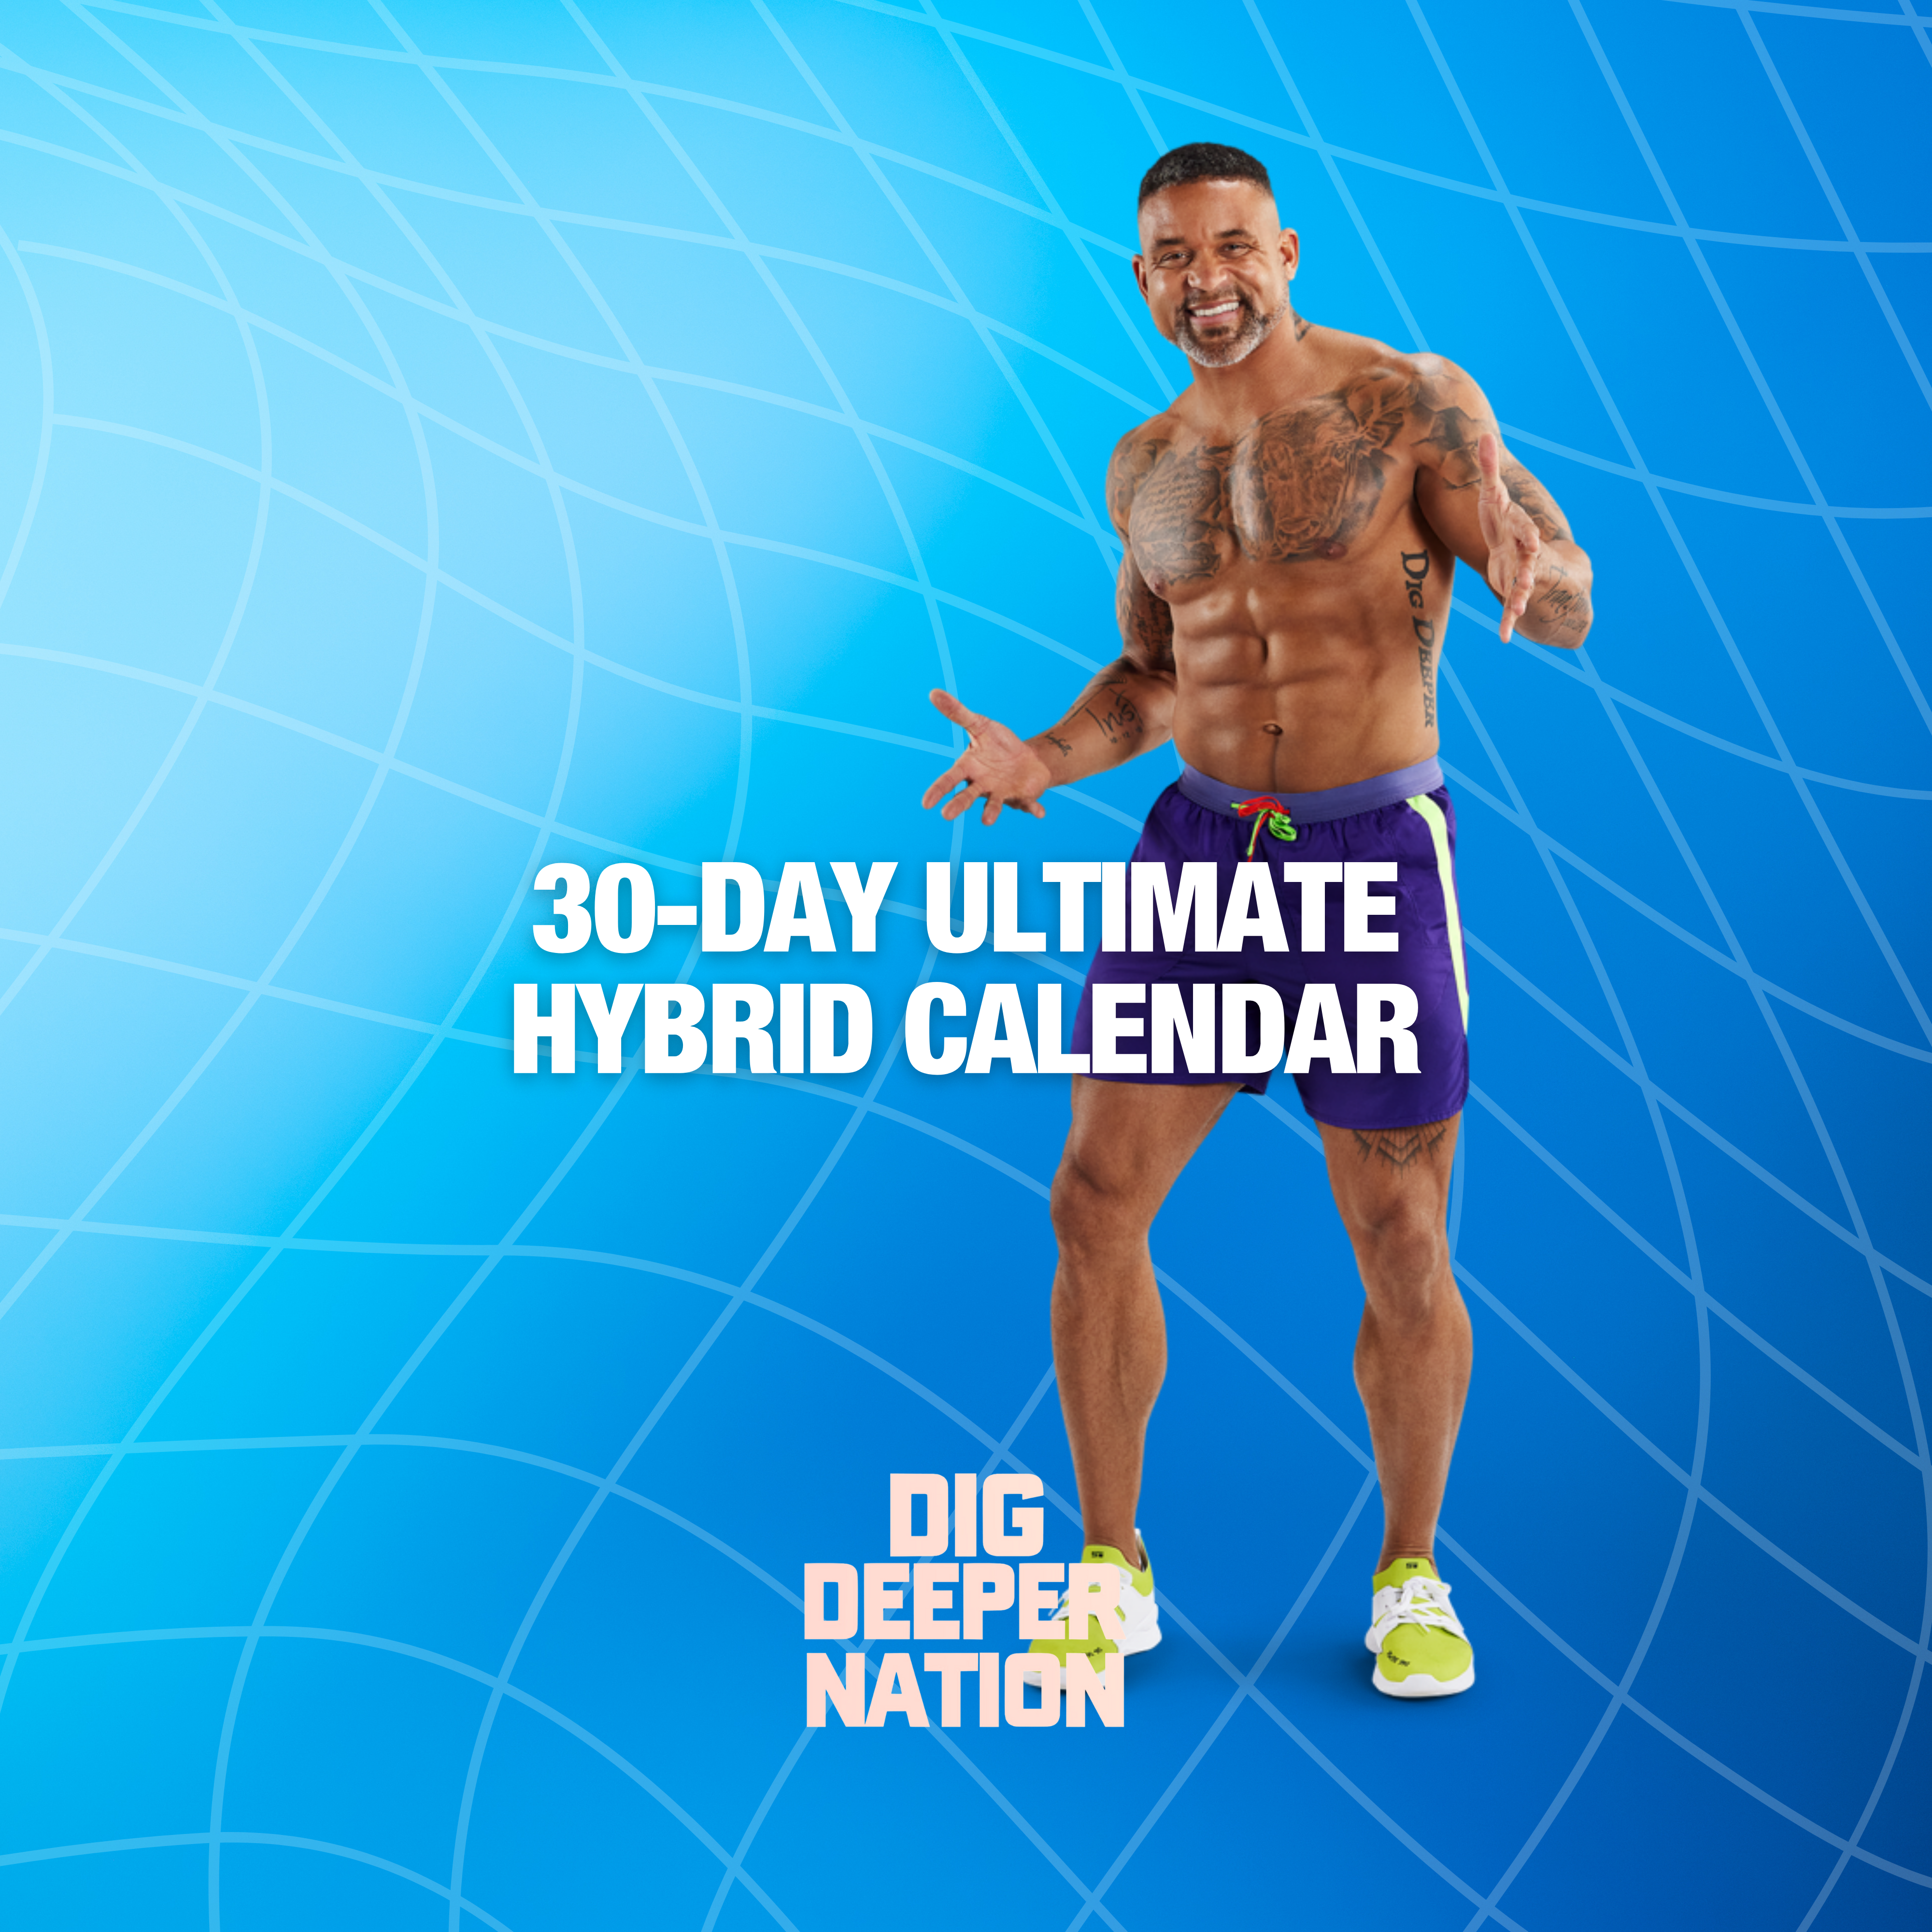 Blue background with Shaun T in foreground and white text reading "30-Day Ultimate Hybrid Calendar"